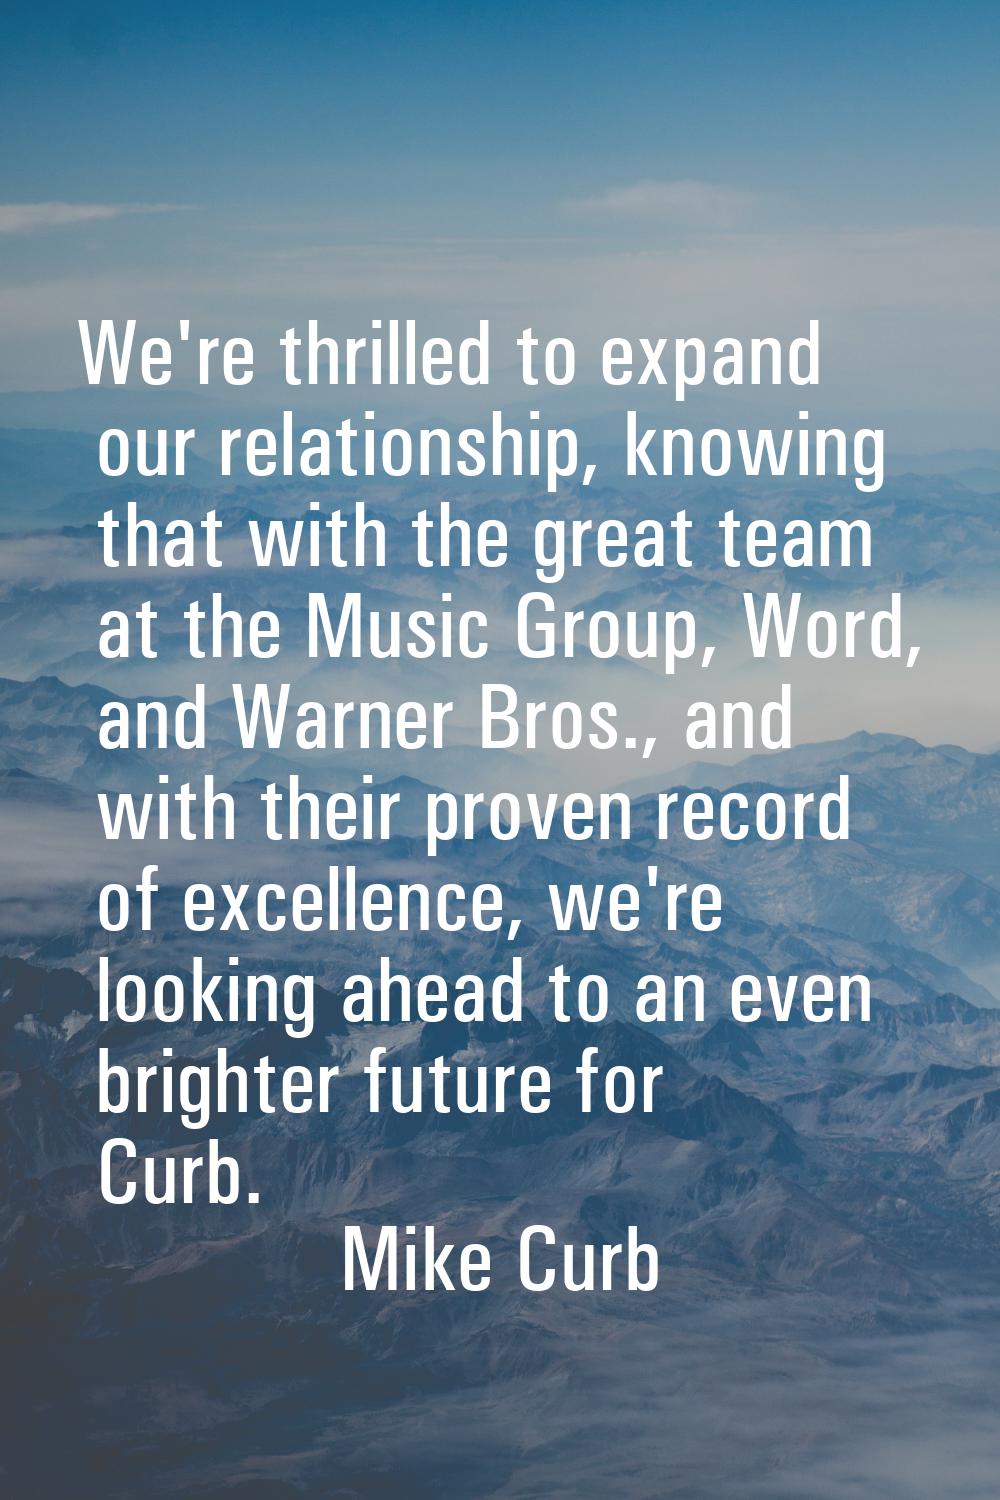 We're thrilled to expand our relationship, knowing that with the great team at the Music Group, Wor